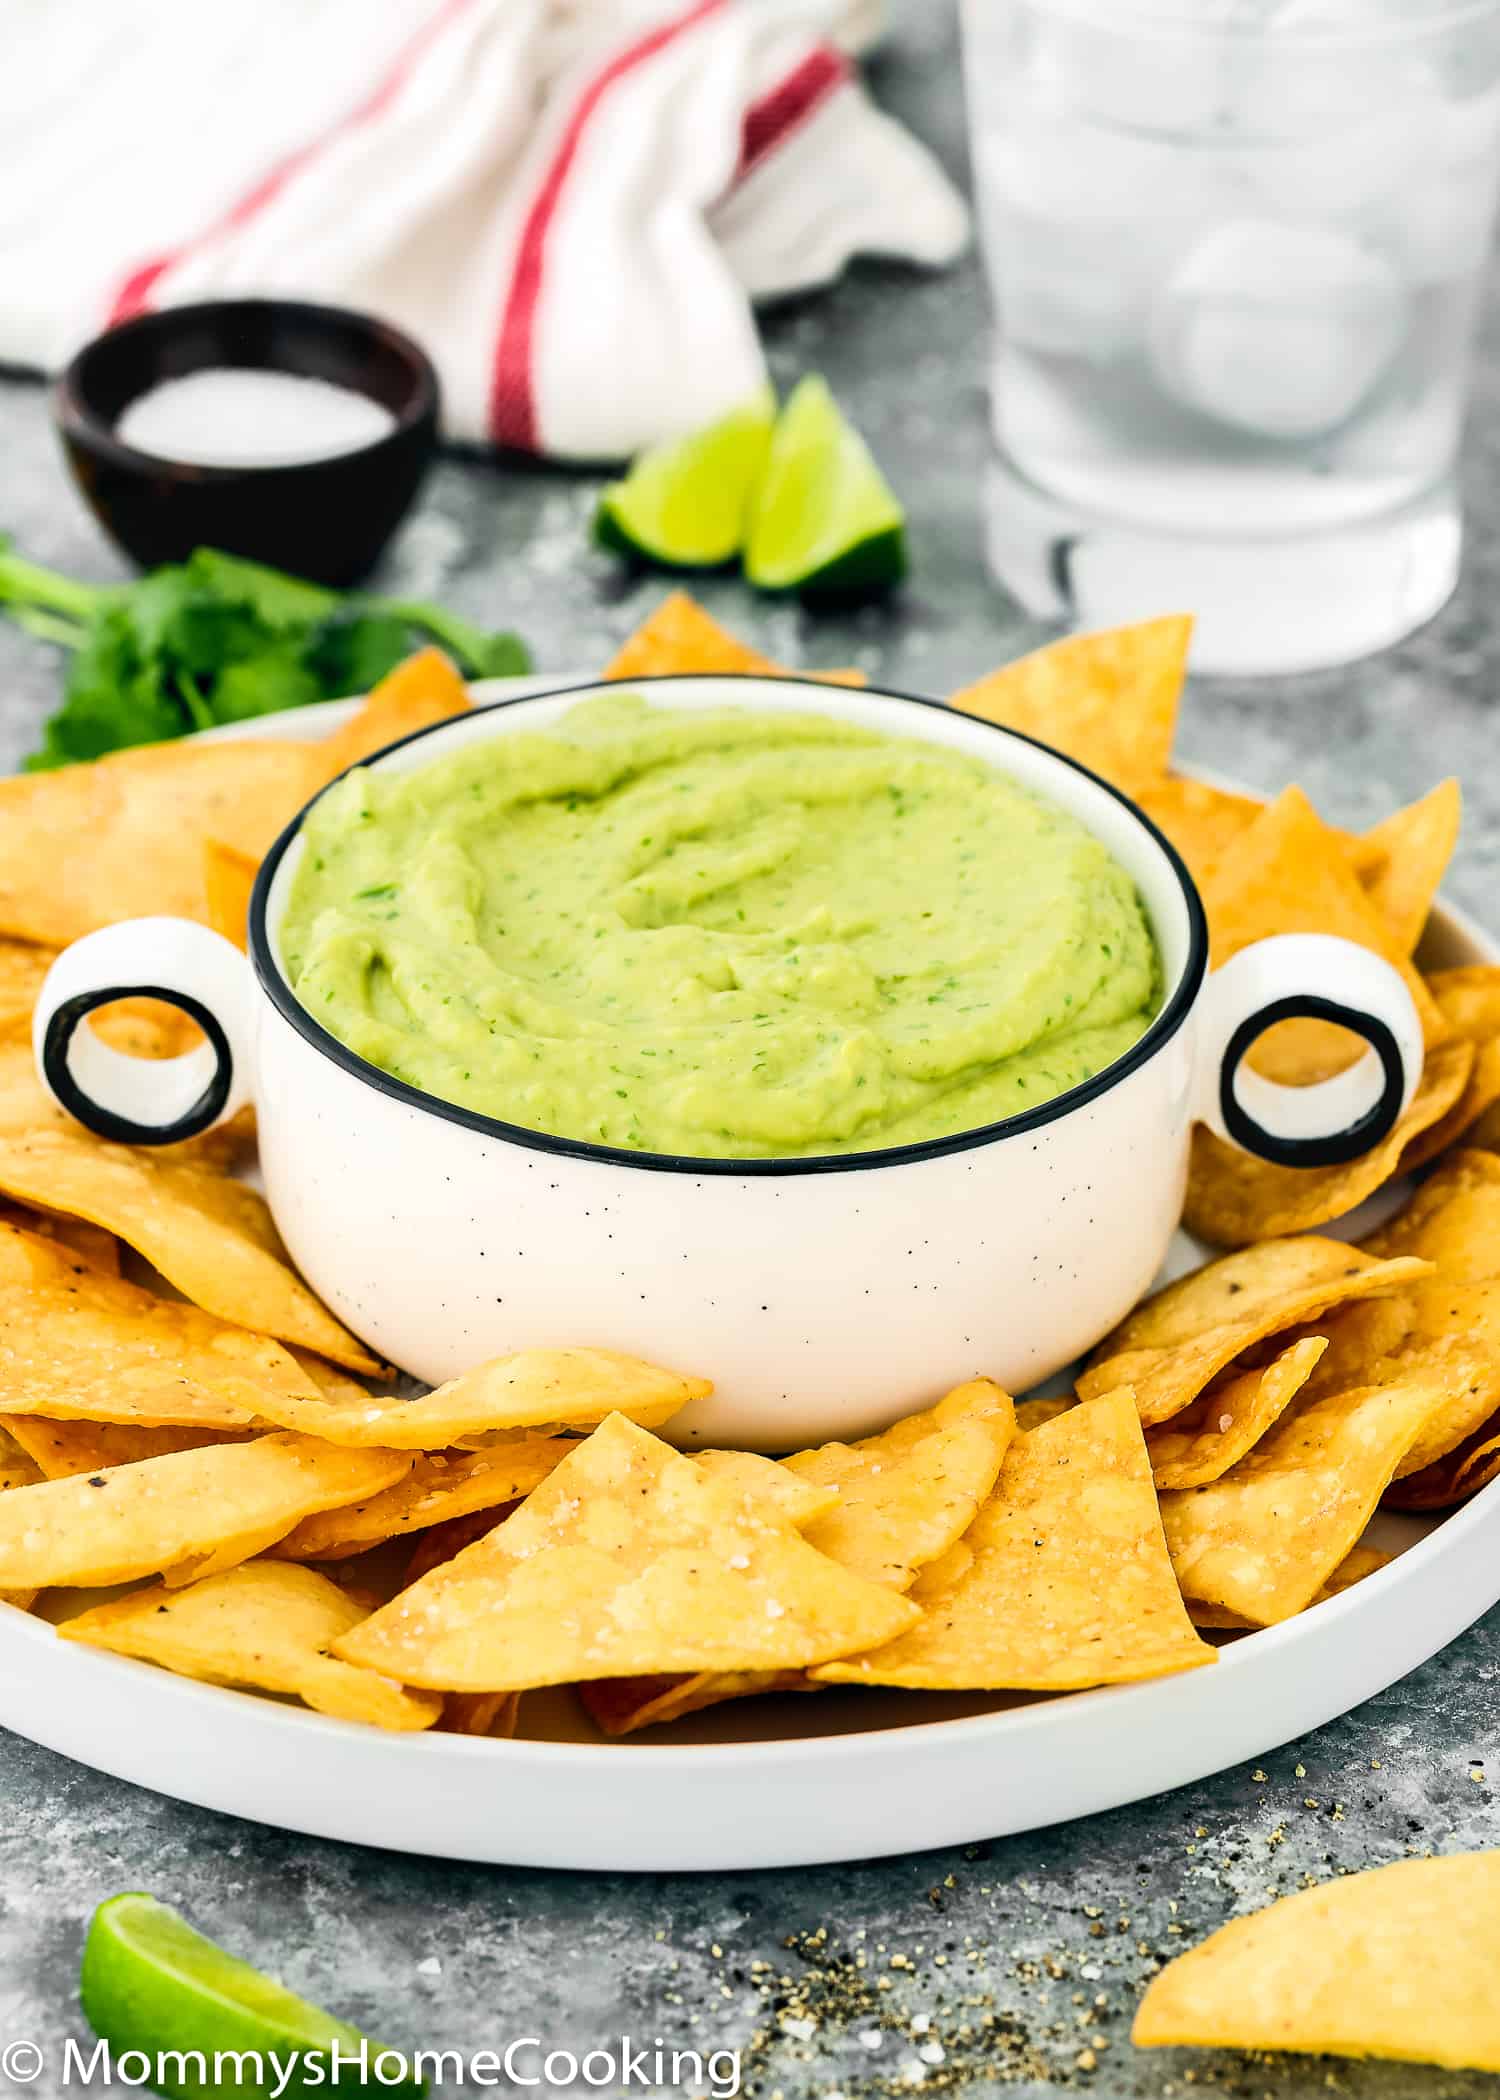 plate with tortilla chips and avocado sauce.